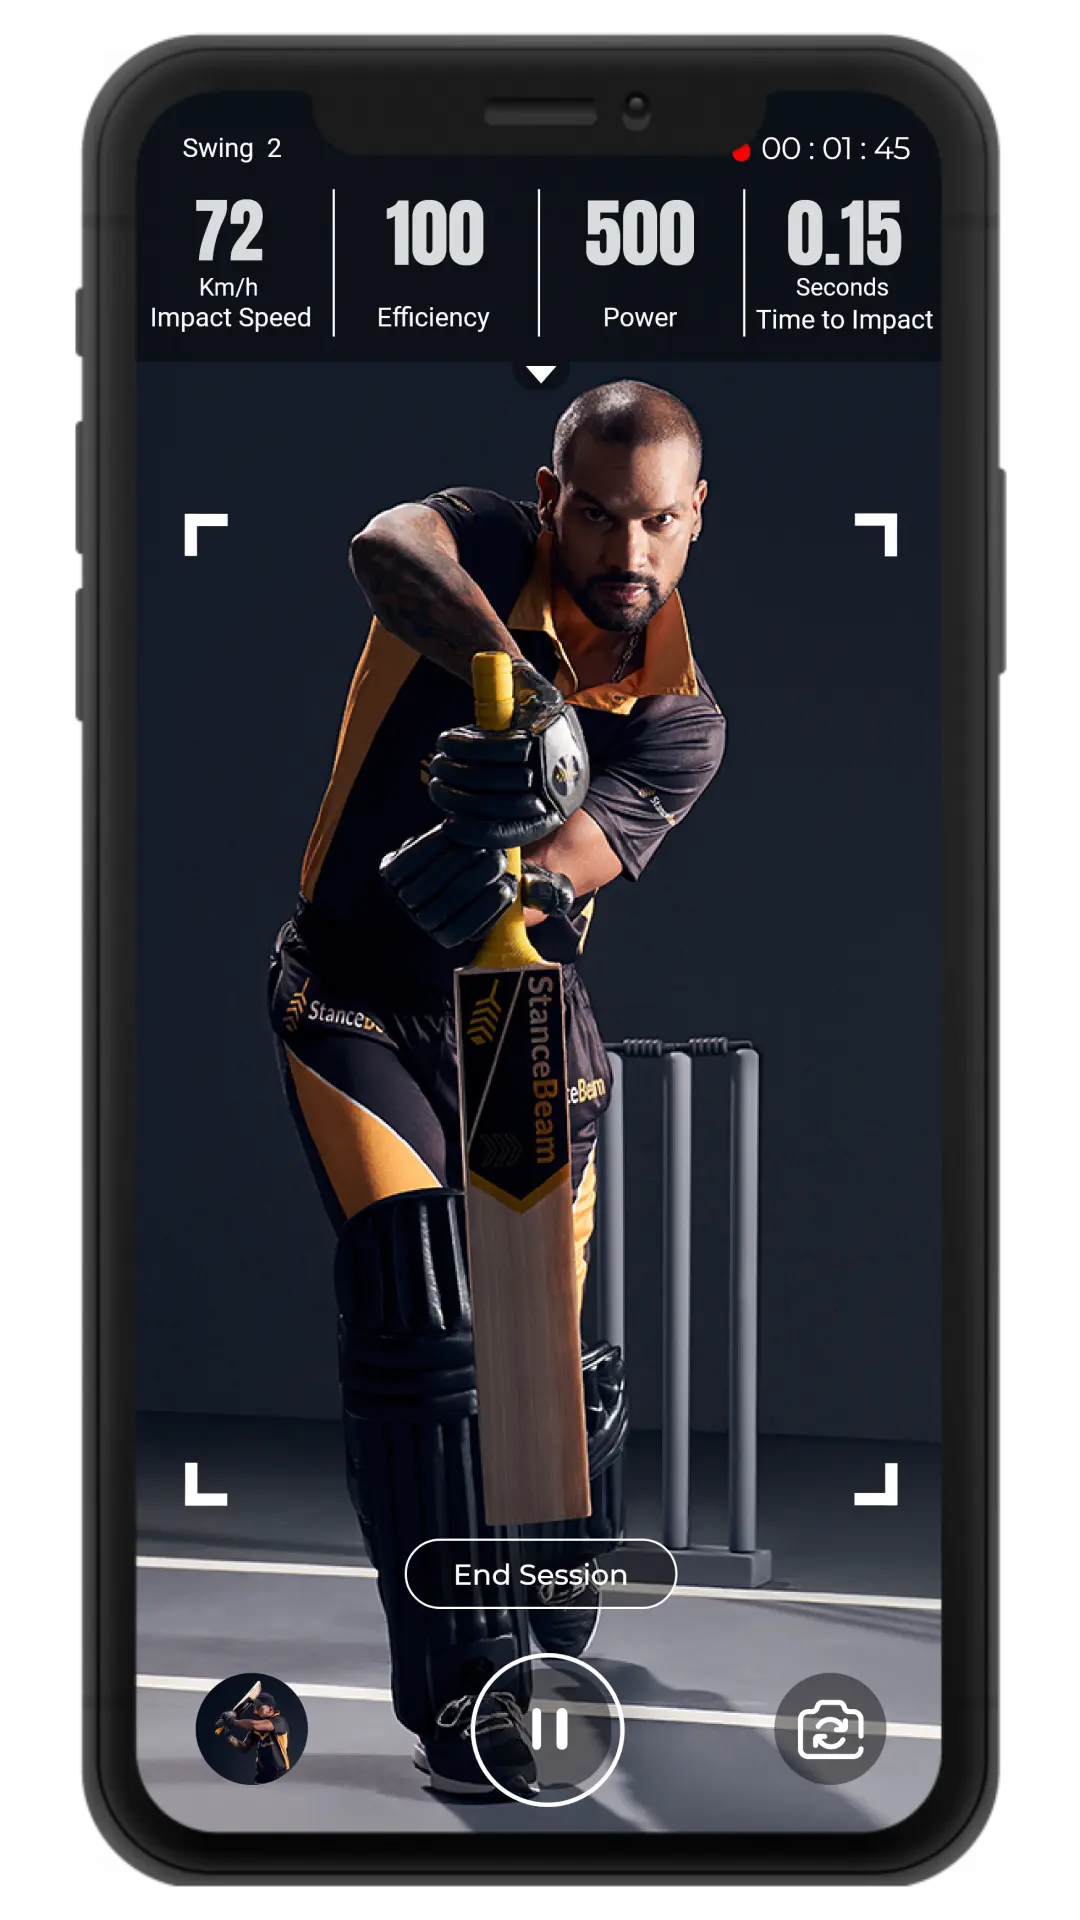 Live Video Recording with Batting Insights in StanceBeam Cricket Coaching App